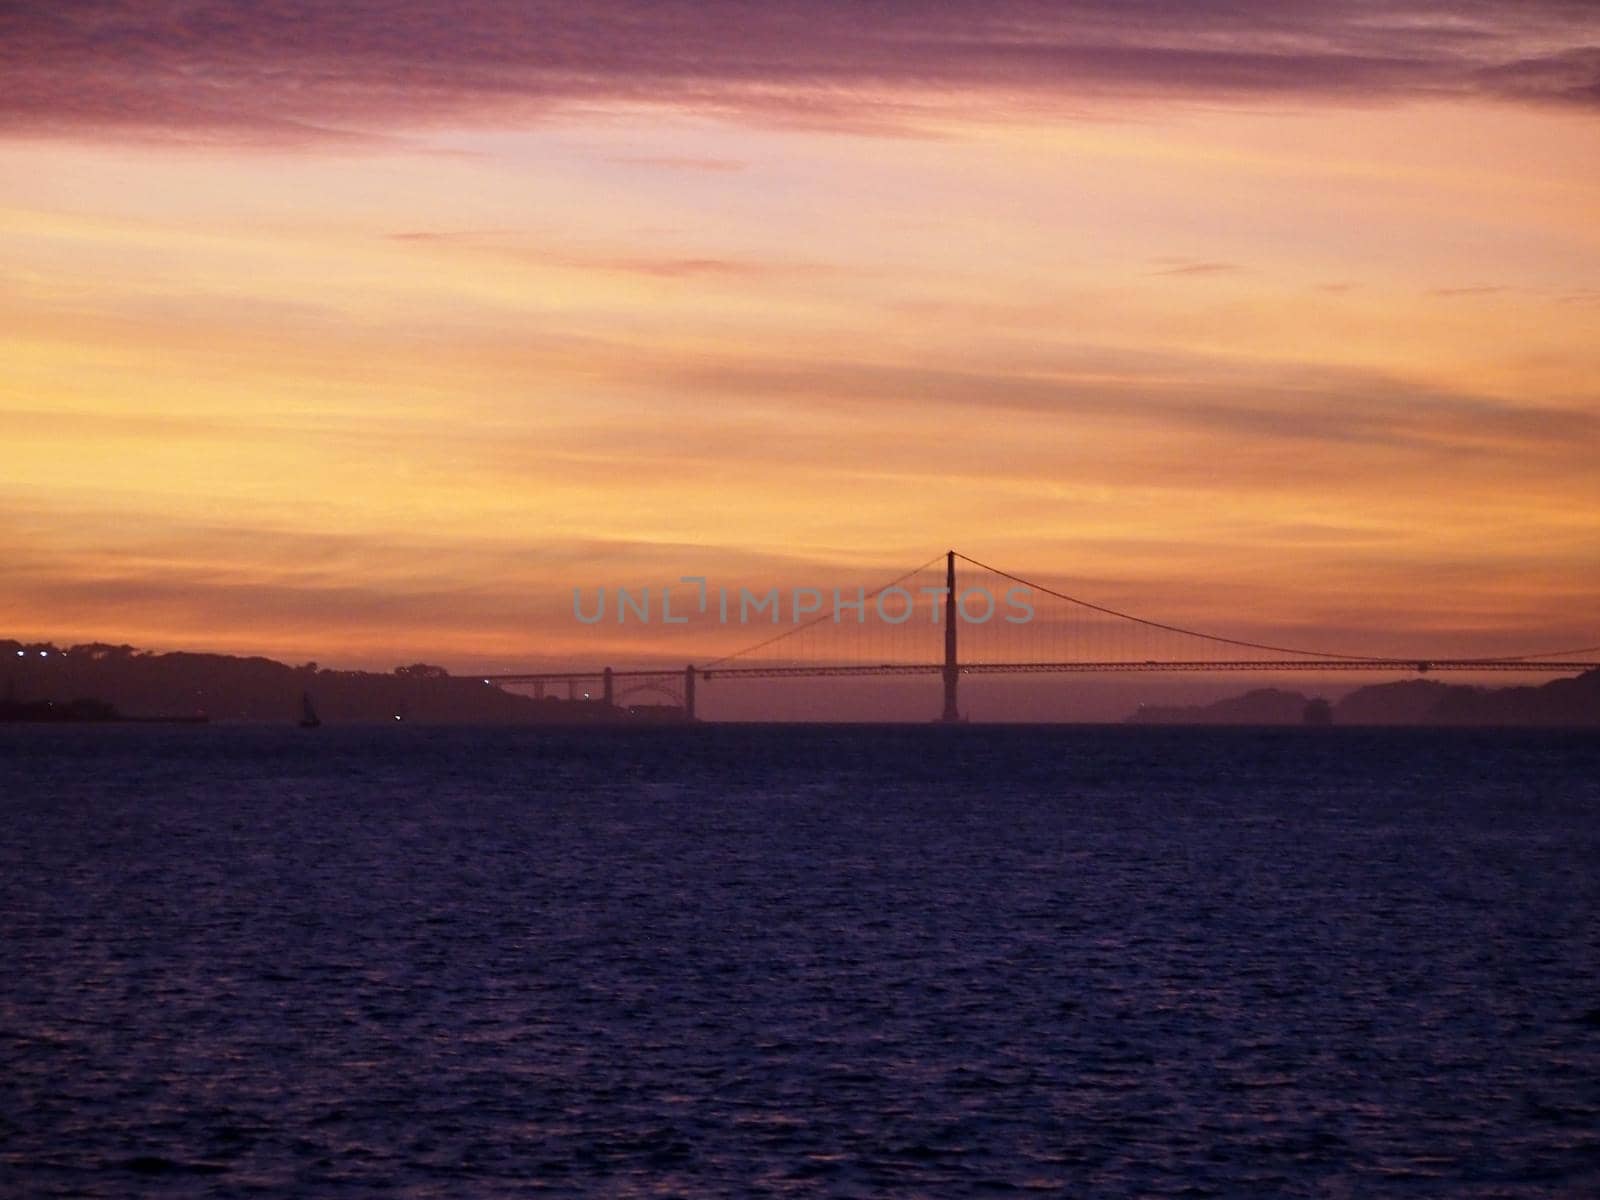 Sunset over San Francisco Bay and the Golden Gate Bridge in California.